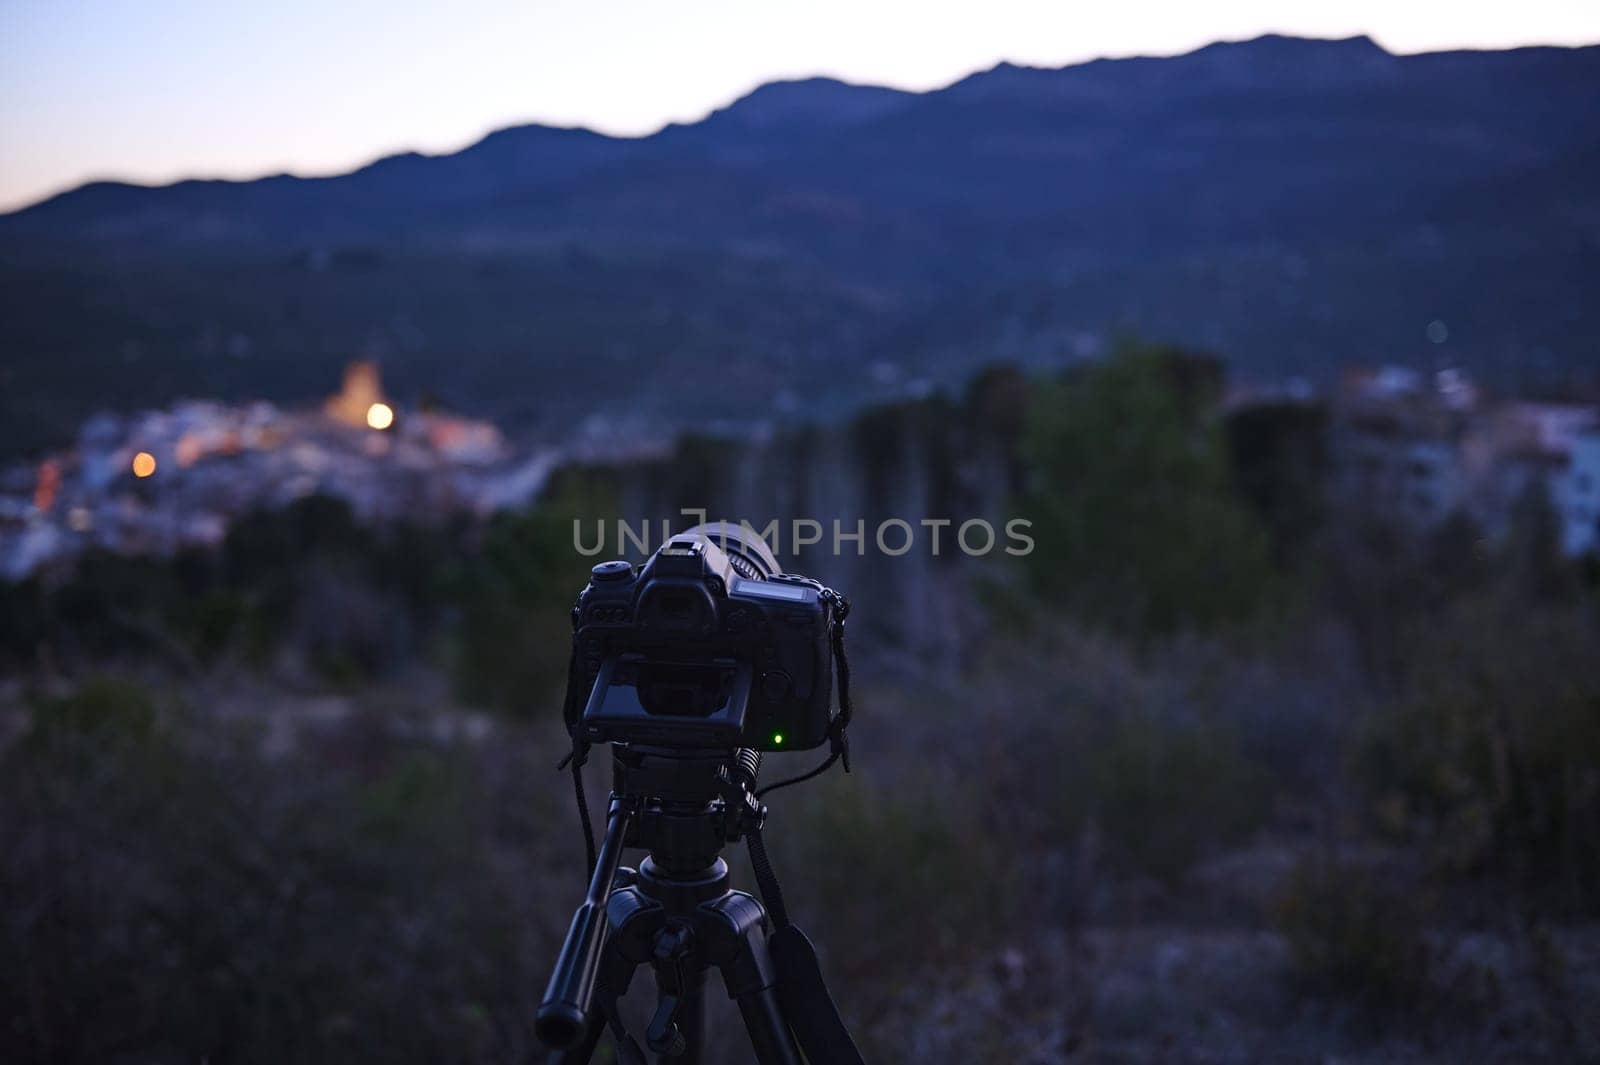 Horizontal shot of modern digital camera placed on tripod in nature outdoors, ready for capturing steady pictures or video of a village in mountains at dawn. World photography day concept. by artgf